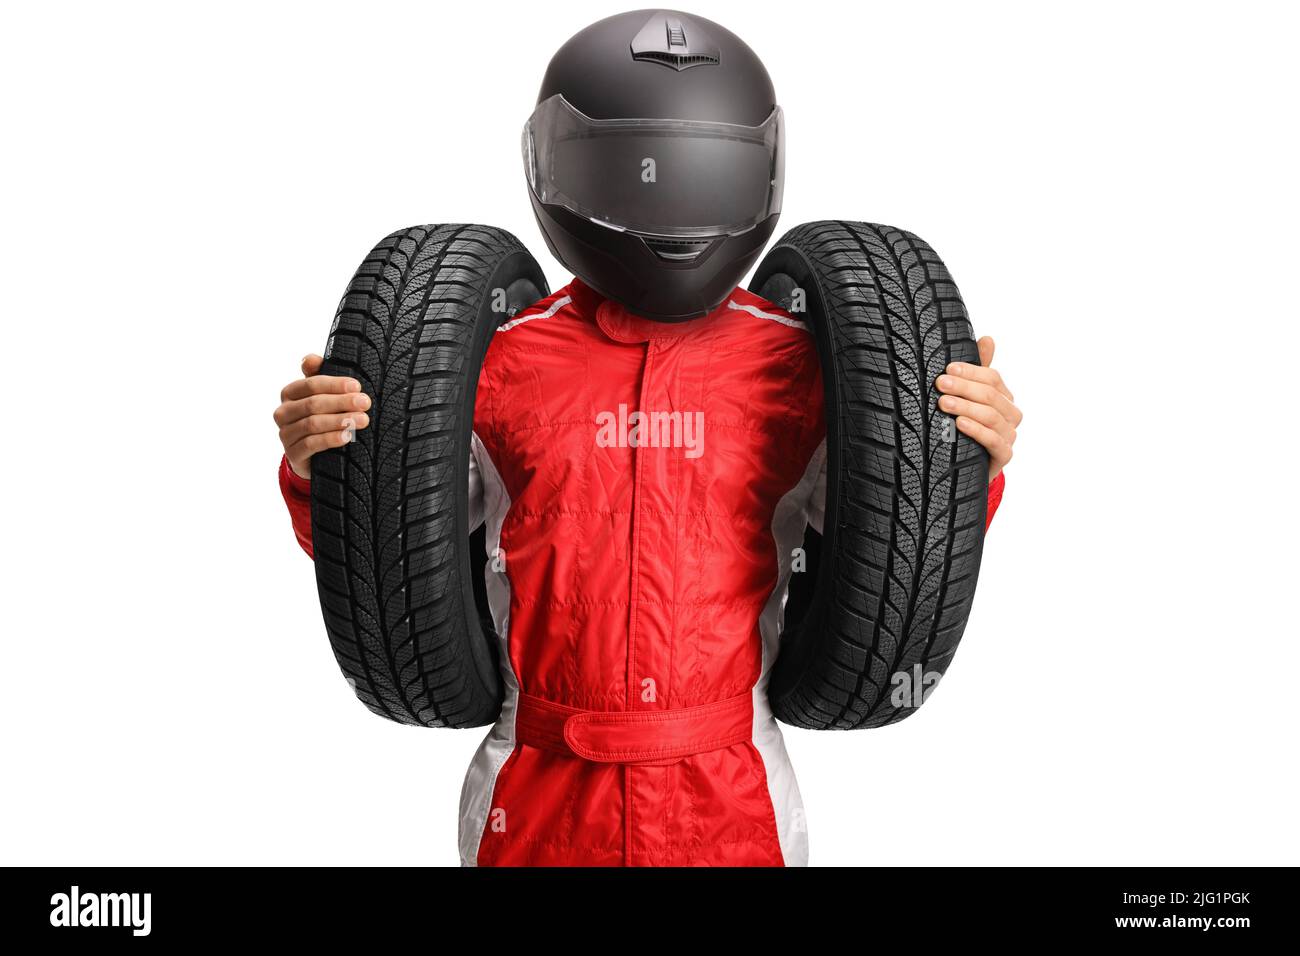 Racer with a helmet holding car tires isolated on white background Stock Photo